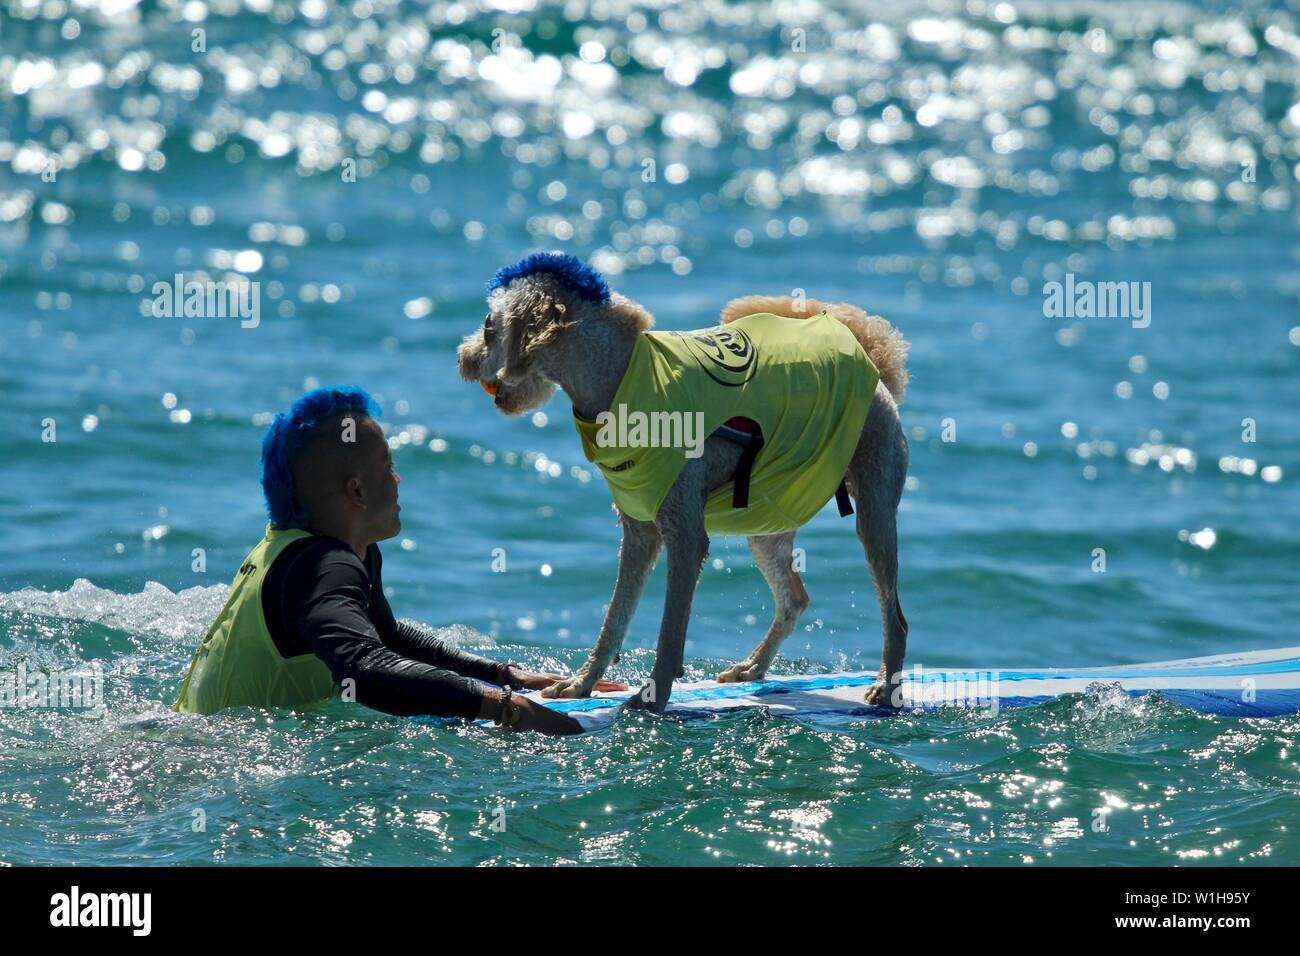 Dog surfing competition in Huntington Beach, California Stock Photo